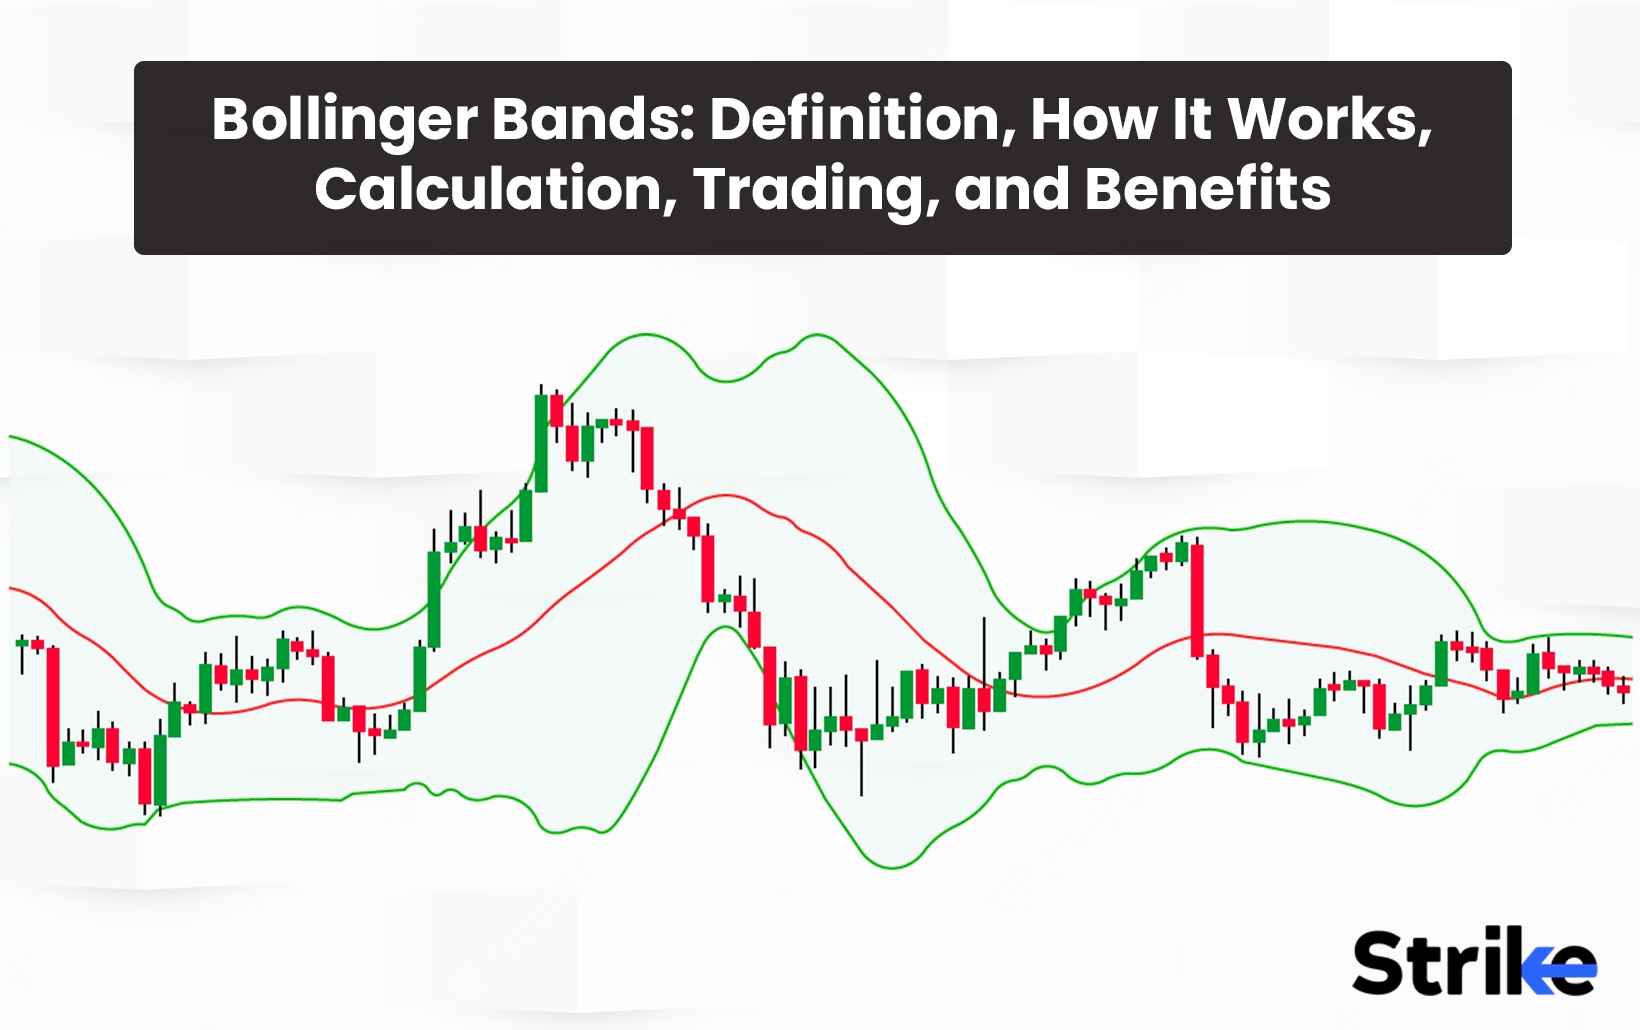 Bollinger Bands: Definition, How It Works, Calculation, Trading, and Benefits